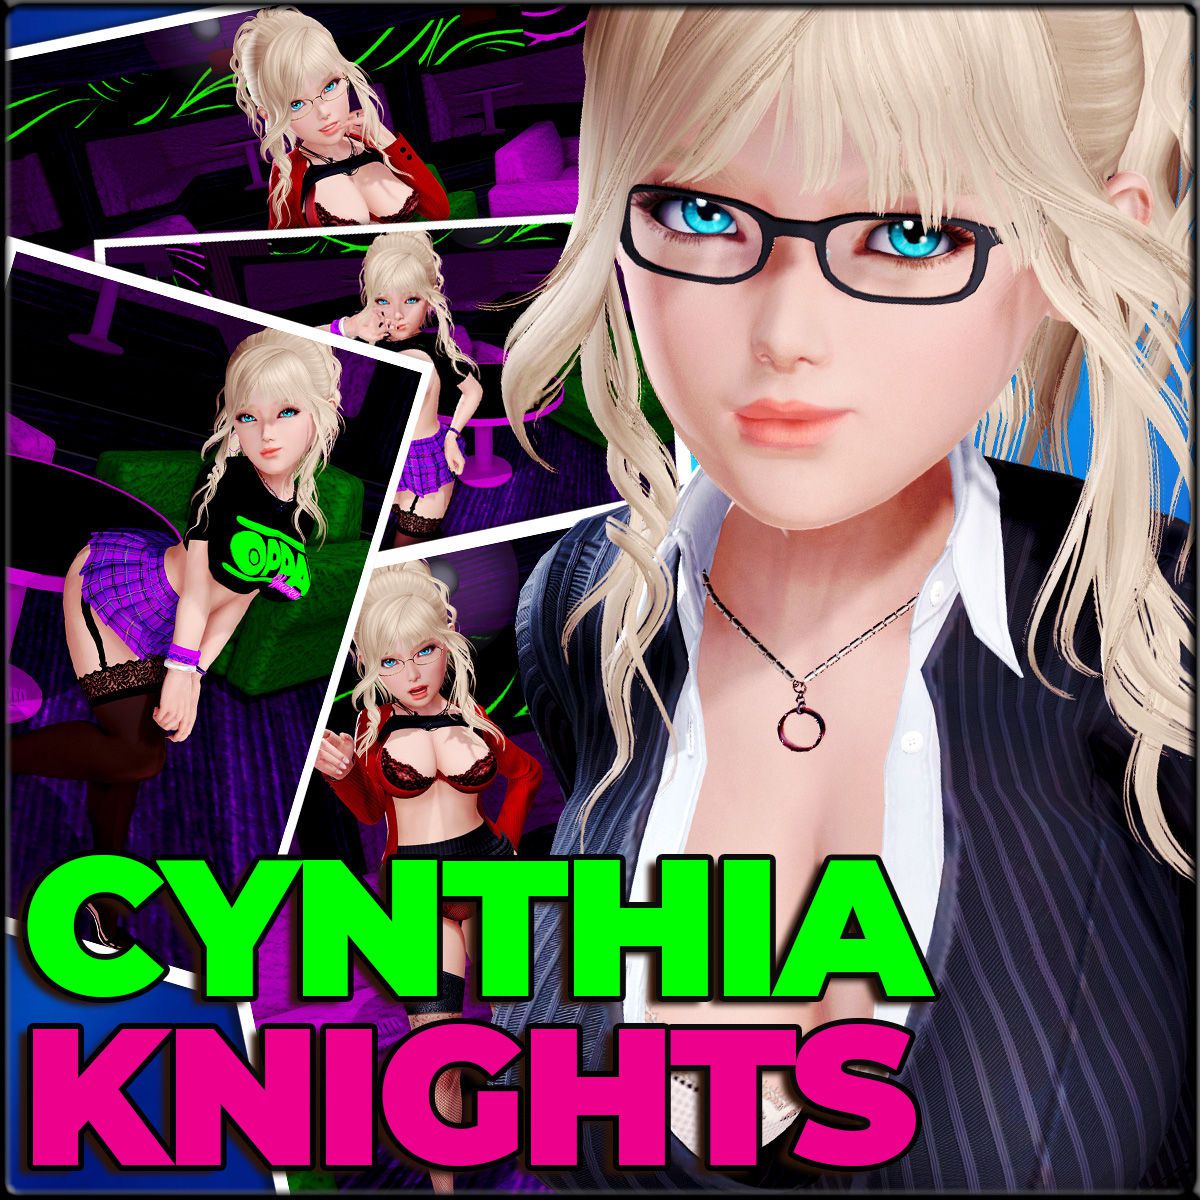 Cynthia Knights: The First Hire 1